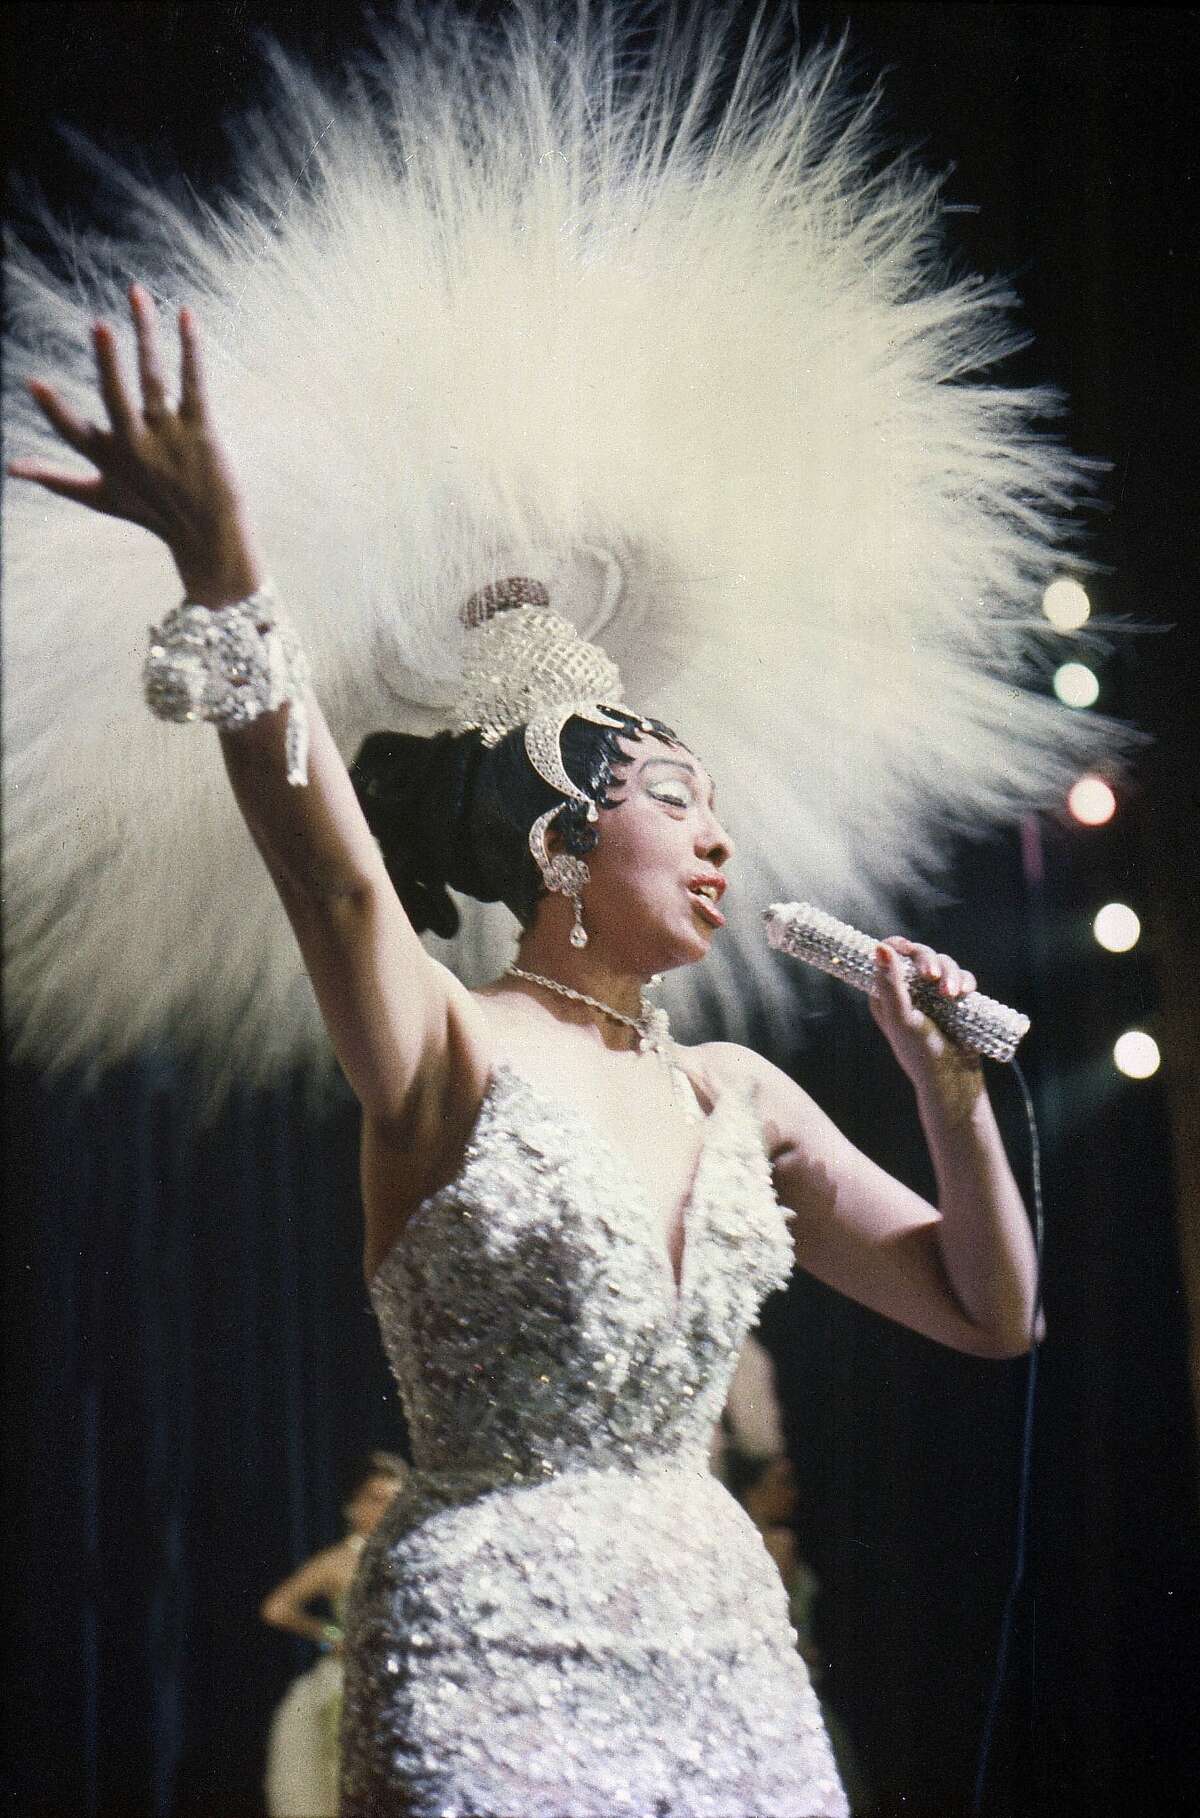 Josephine Baker holds a rhinestone-studded microphone as she performs during her show "Paris, mes Amours" at the Olympia Music Hall in Paris, France, on May 27, 1957.